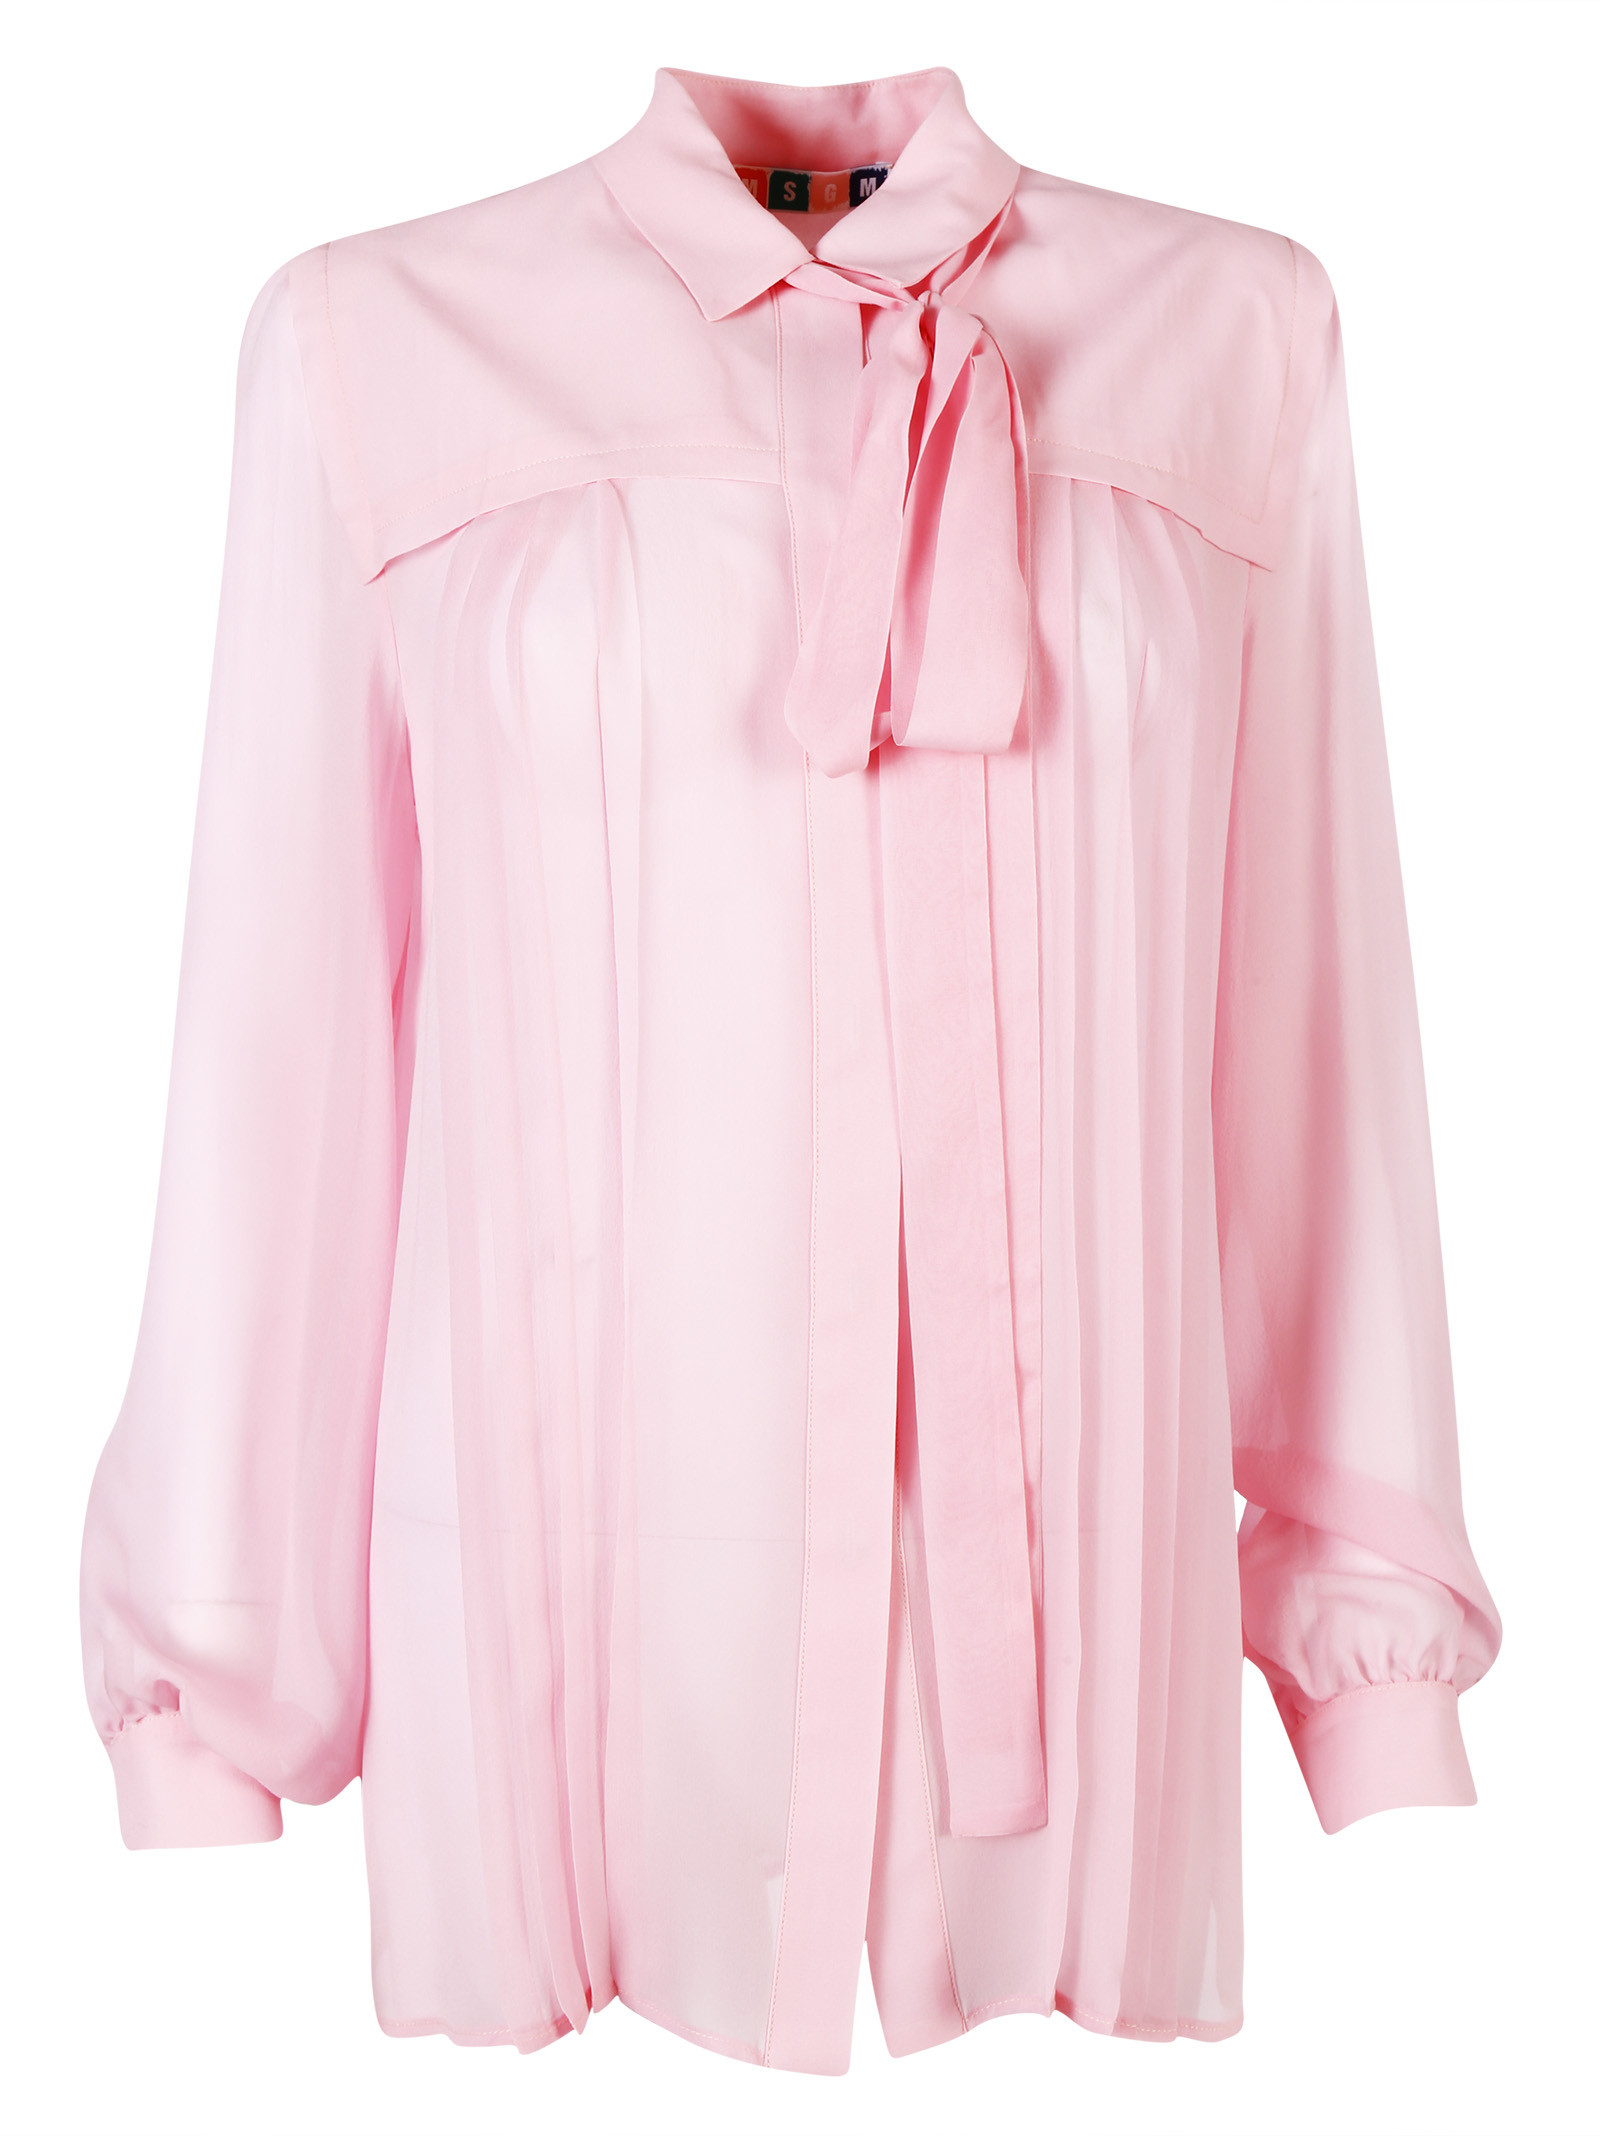 Msgm Silk Sheer Pussy Bow Blouse in Pink | Lyst